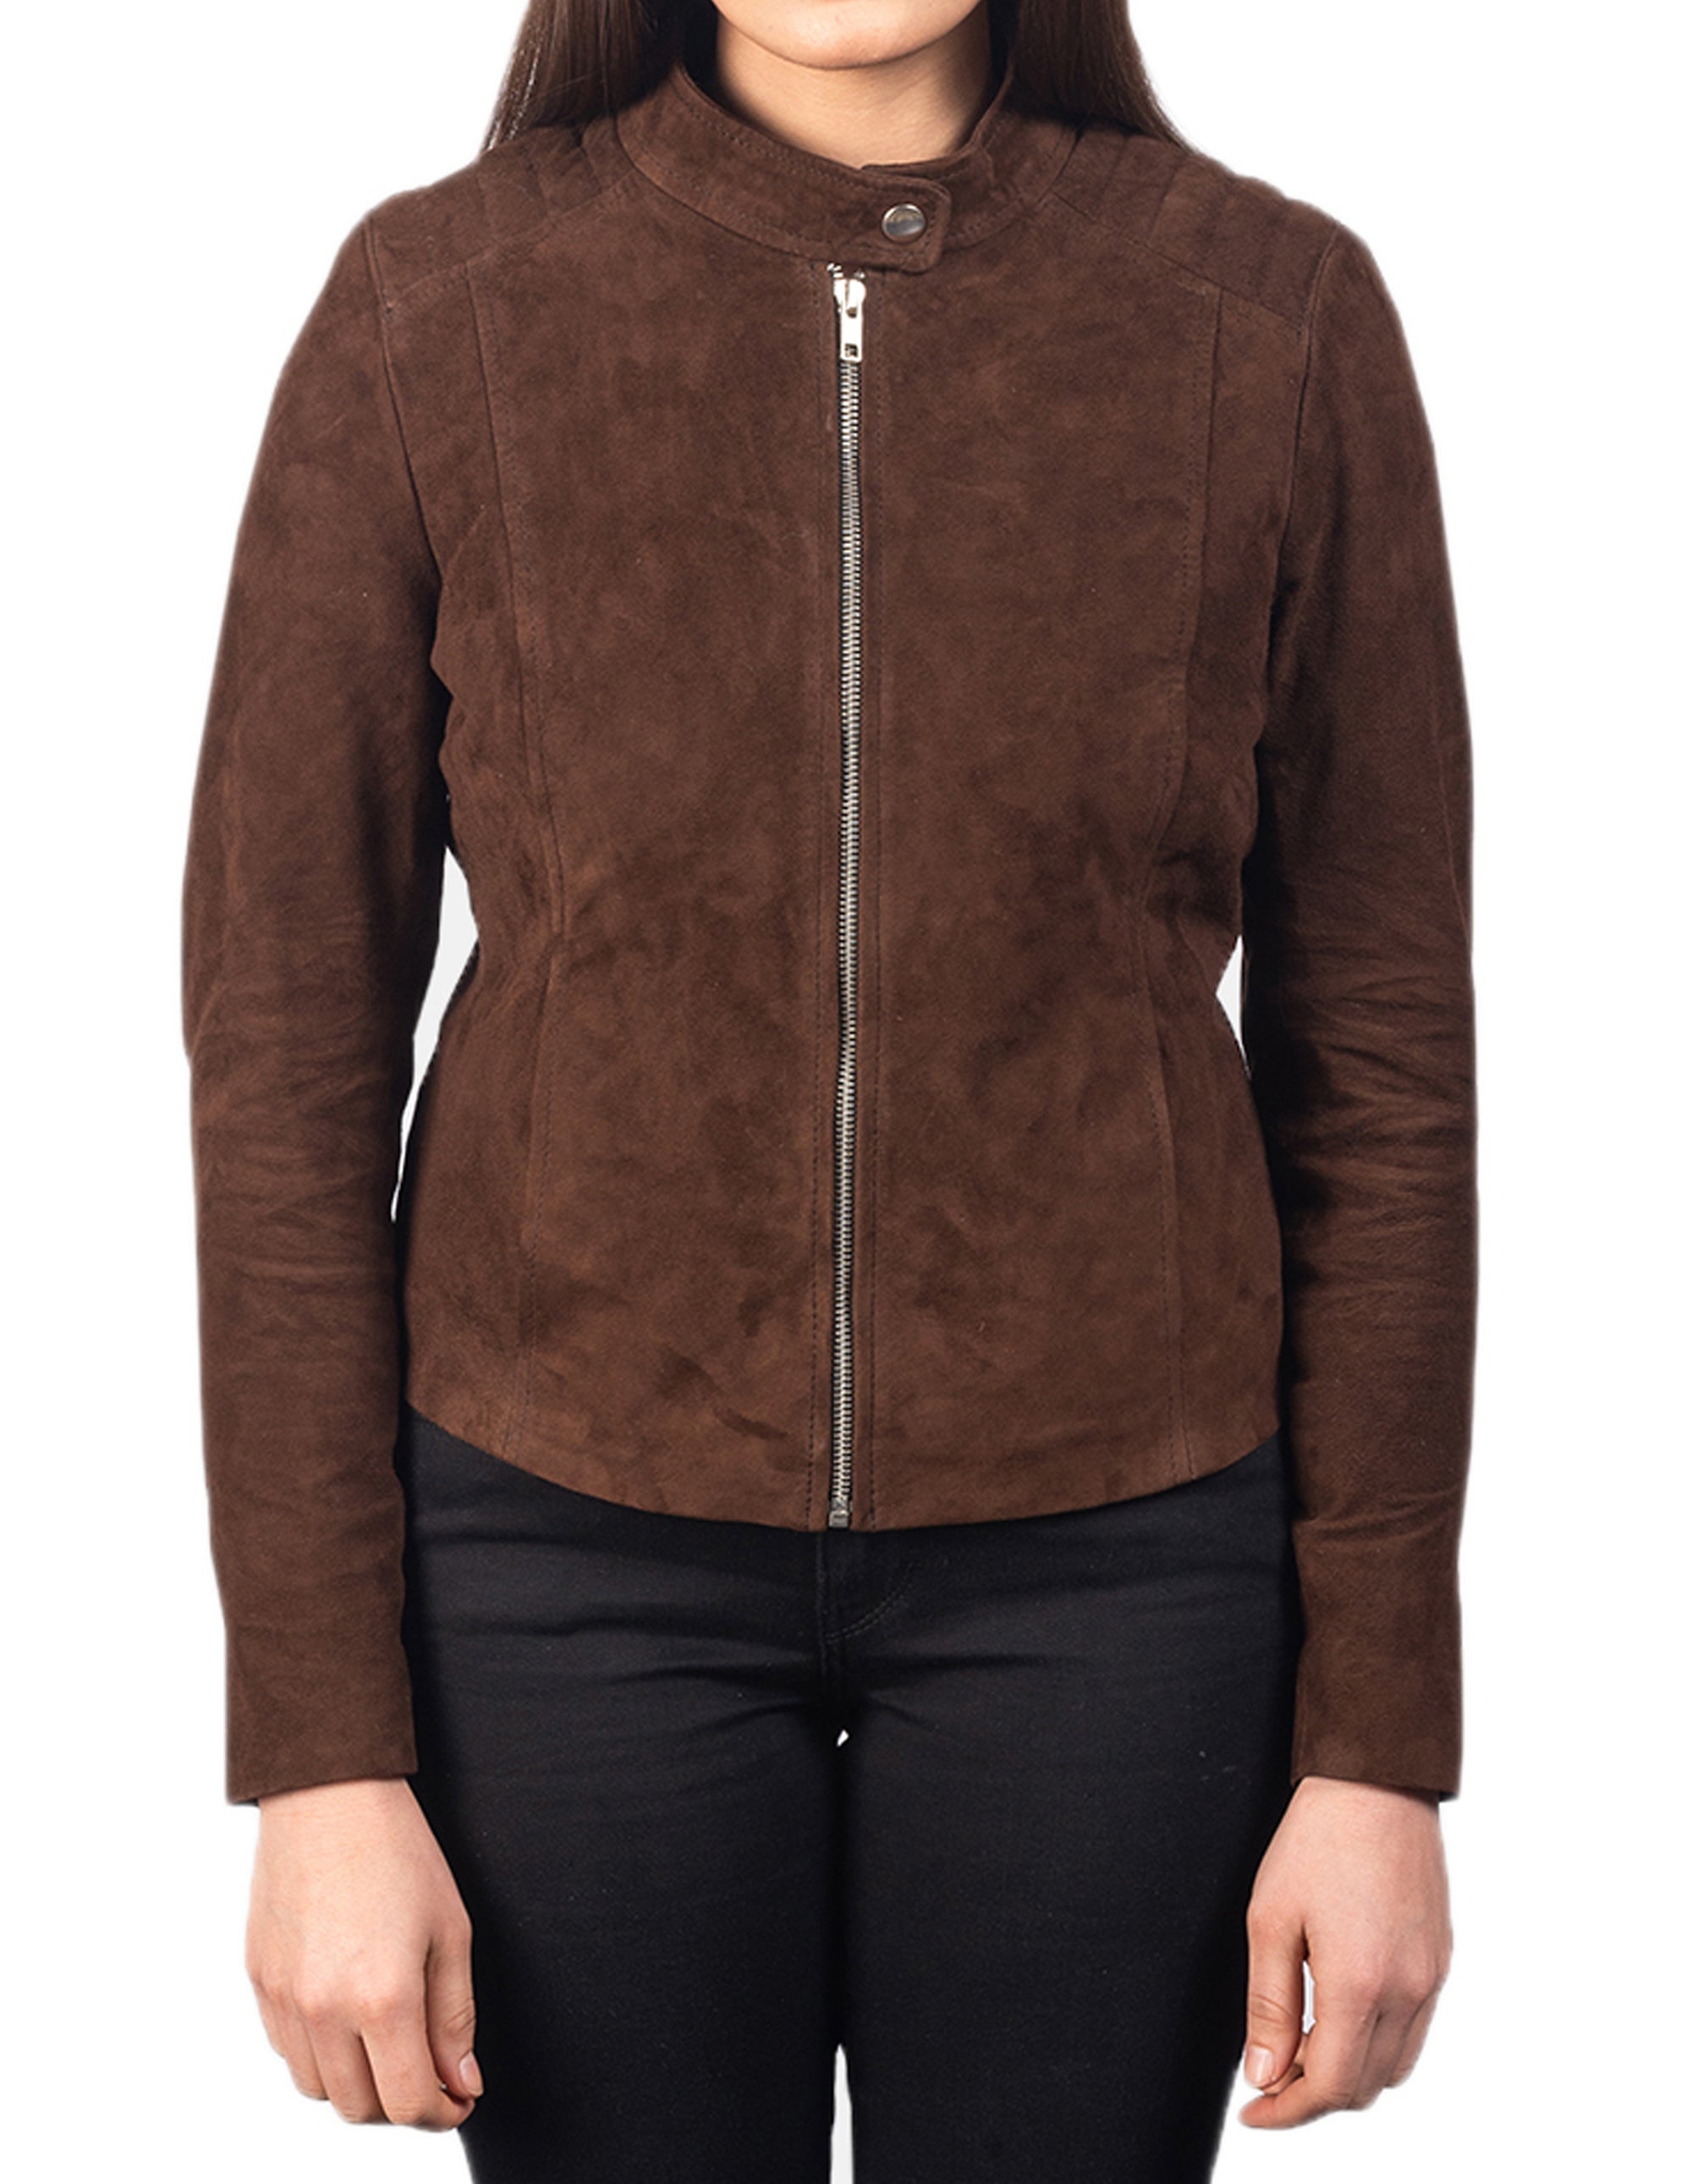 Brown Suede Leather Jacket For Women